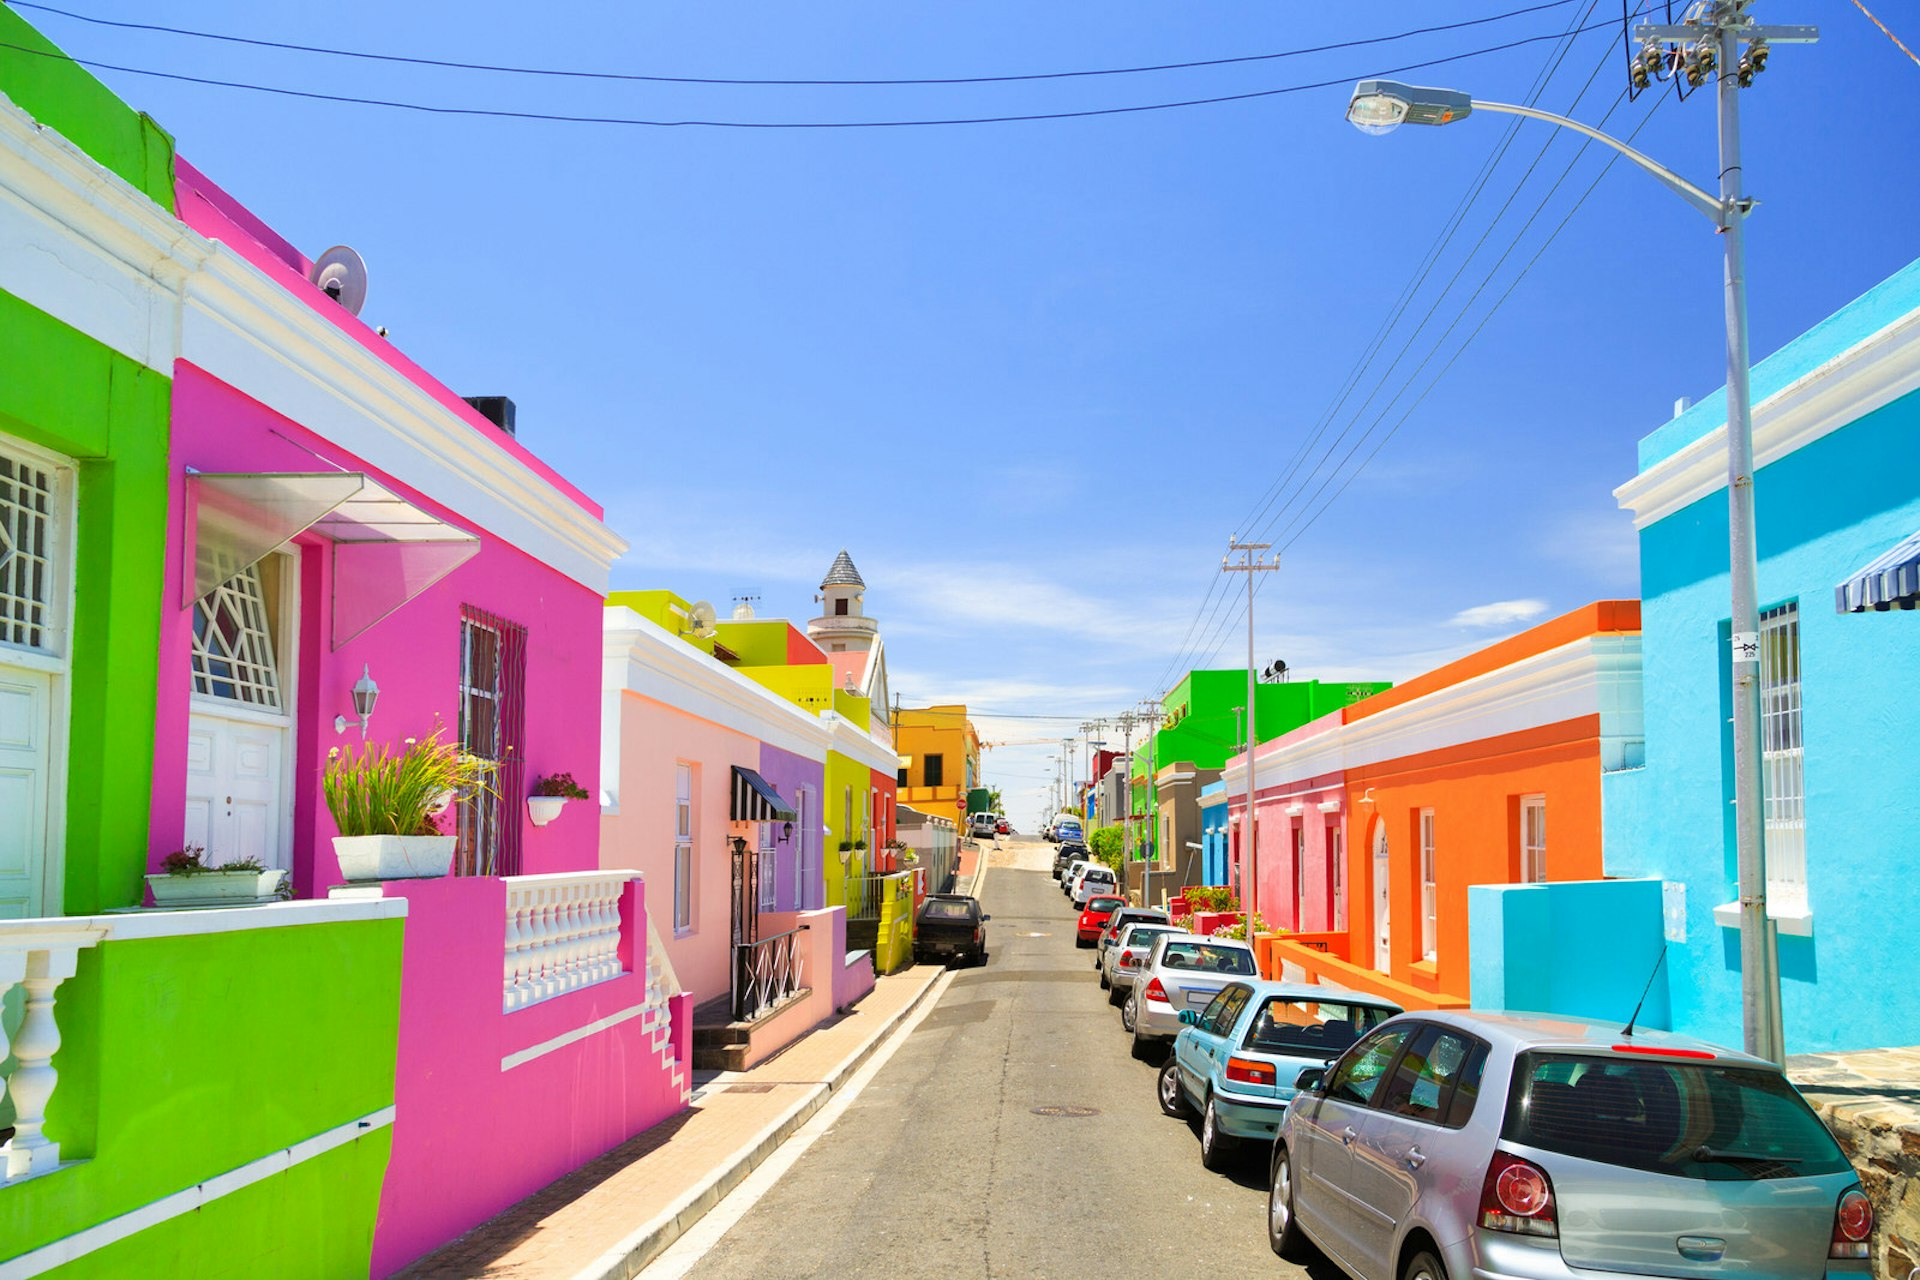 A series of row houses and front walls, each a bright pastel shade of pink, green, orange, yellow and red, flank either side of the street © Nicky Classen / Lonely Planet © espiegle / Getty Images